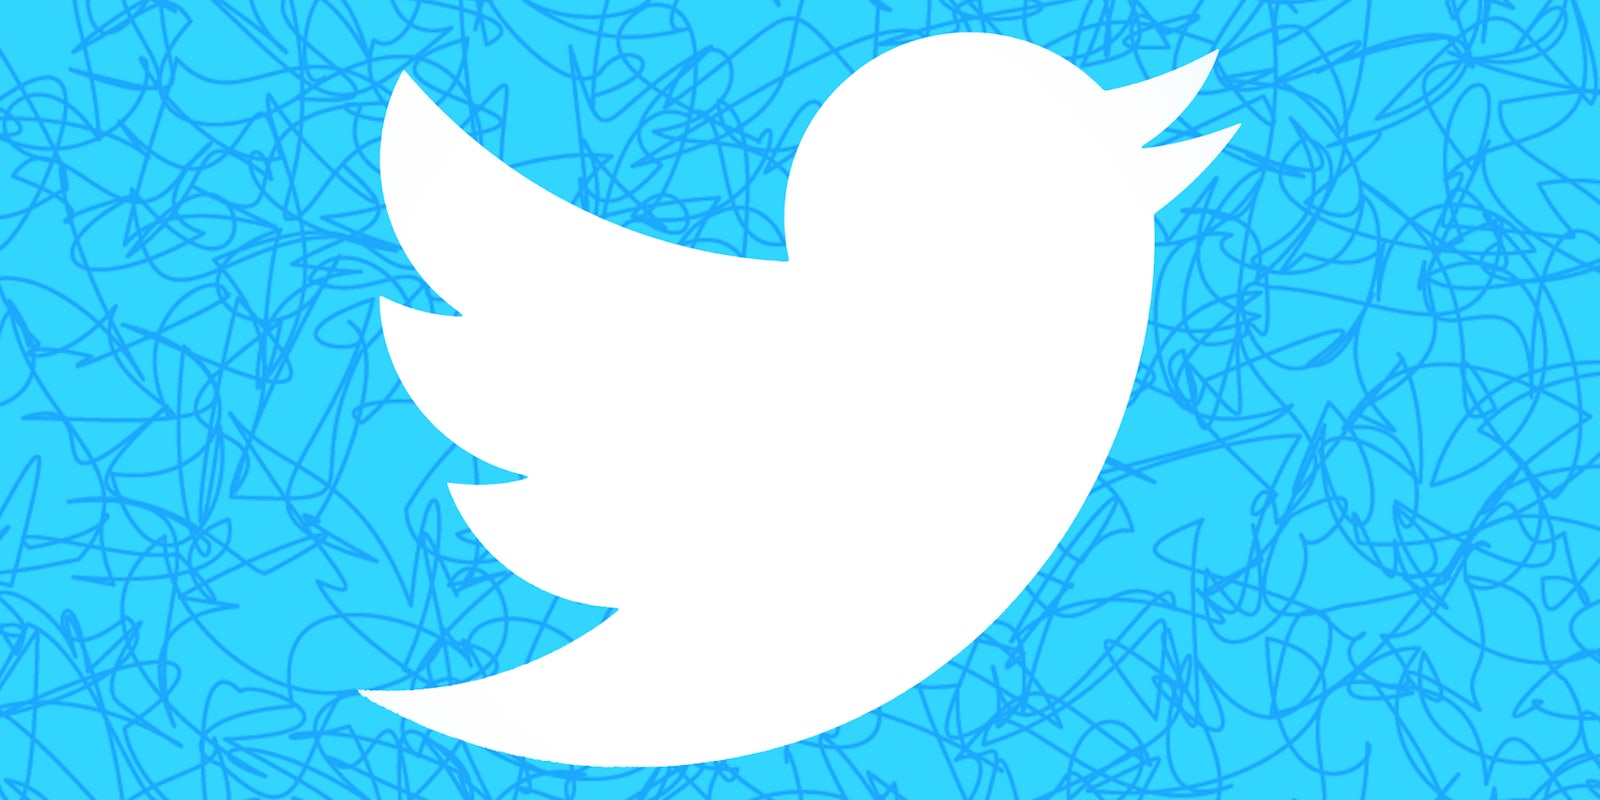 Twitter bird logo white centered on chaotic blue scribble background